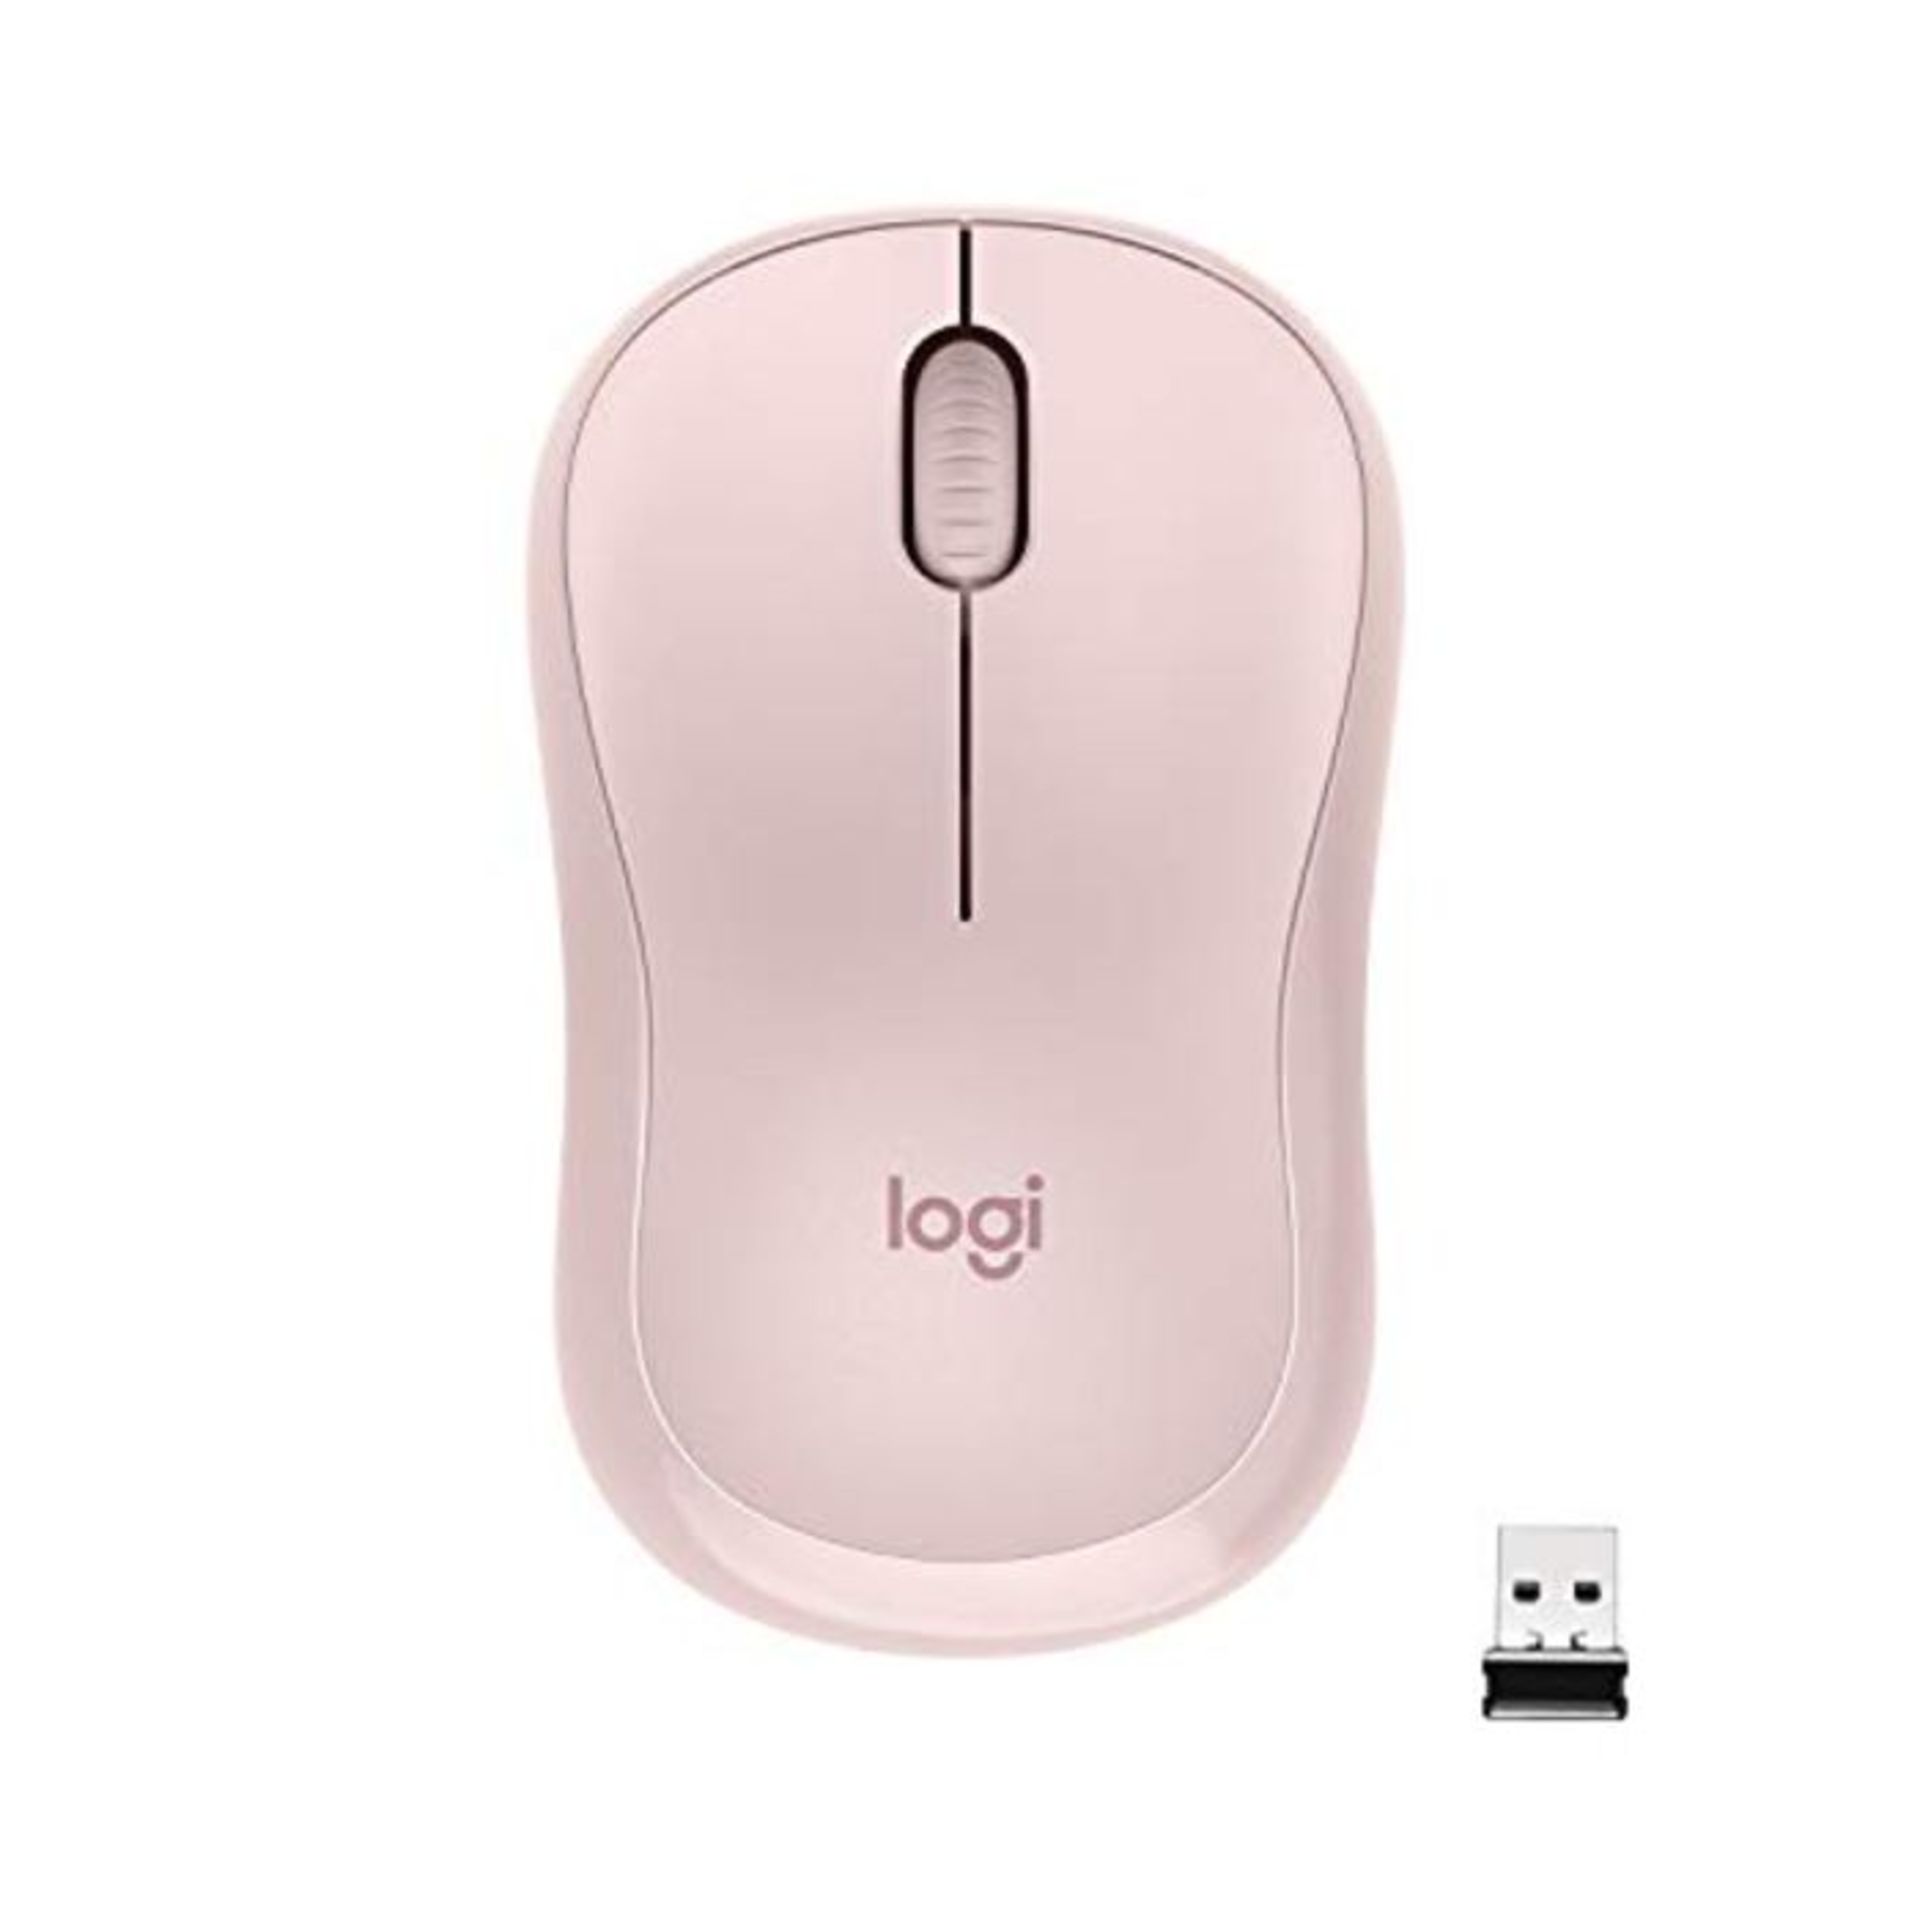 Logitech M220 SILENT Wireless Mouse, 2.4 GHz with USB Receiver, 1000 DPI Optical Track